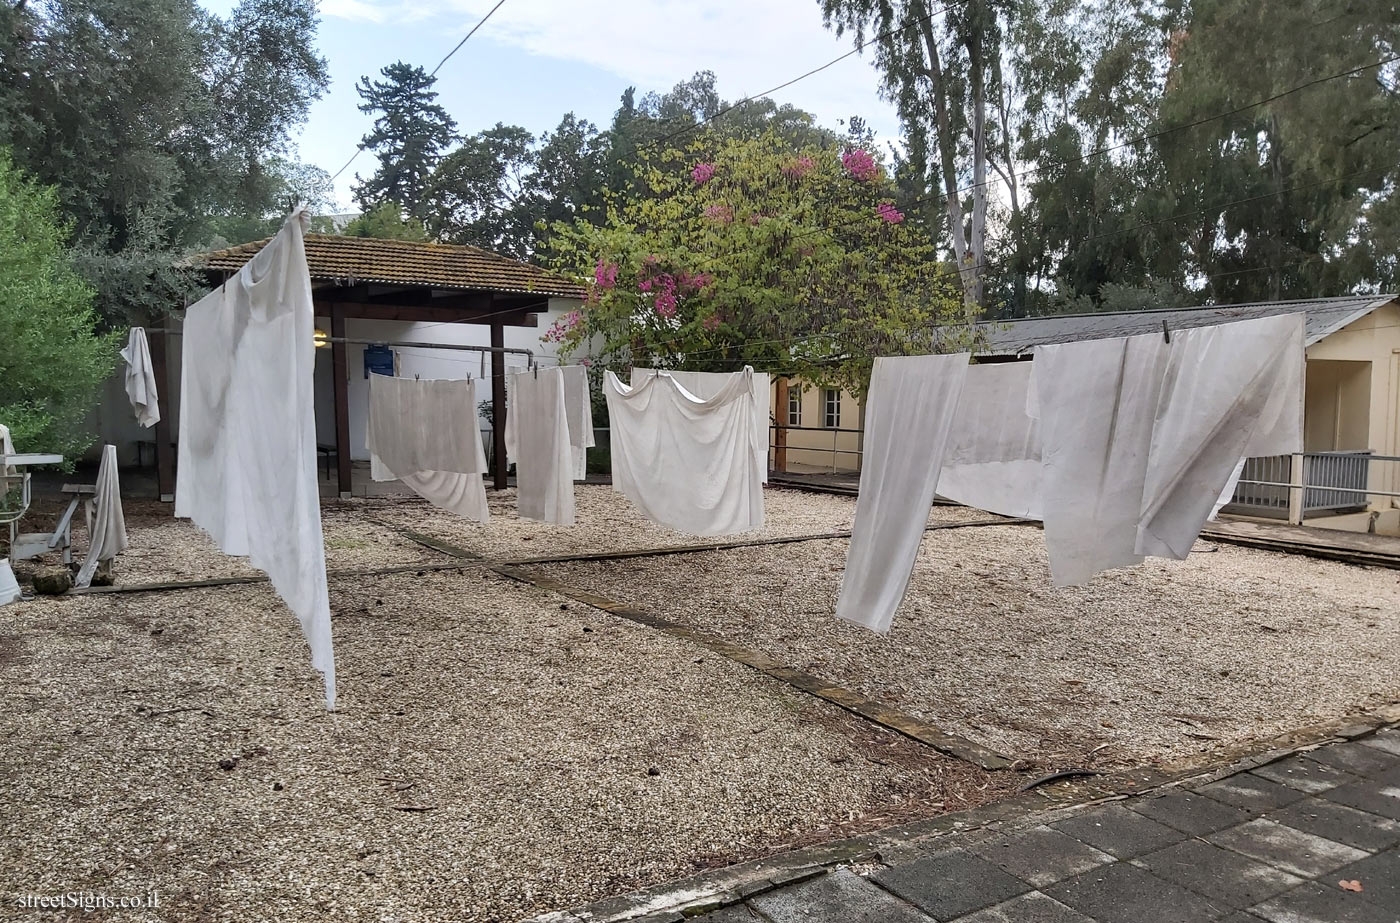 Rehovot - Heritage Sites in Israel - Ayalon Institute - The Laundry - David Fikes St 1, Rehovot, Israel